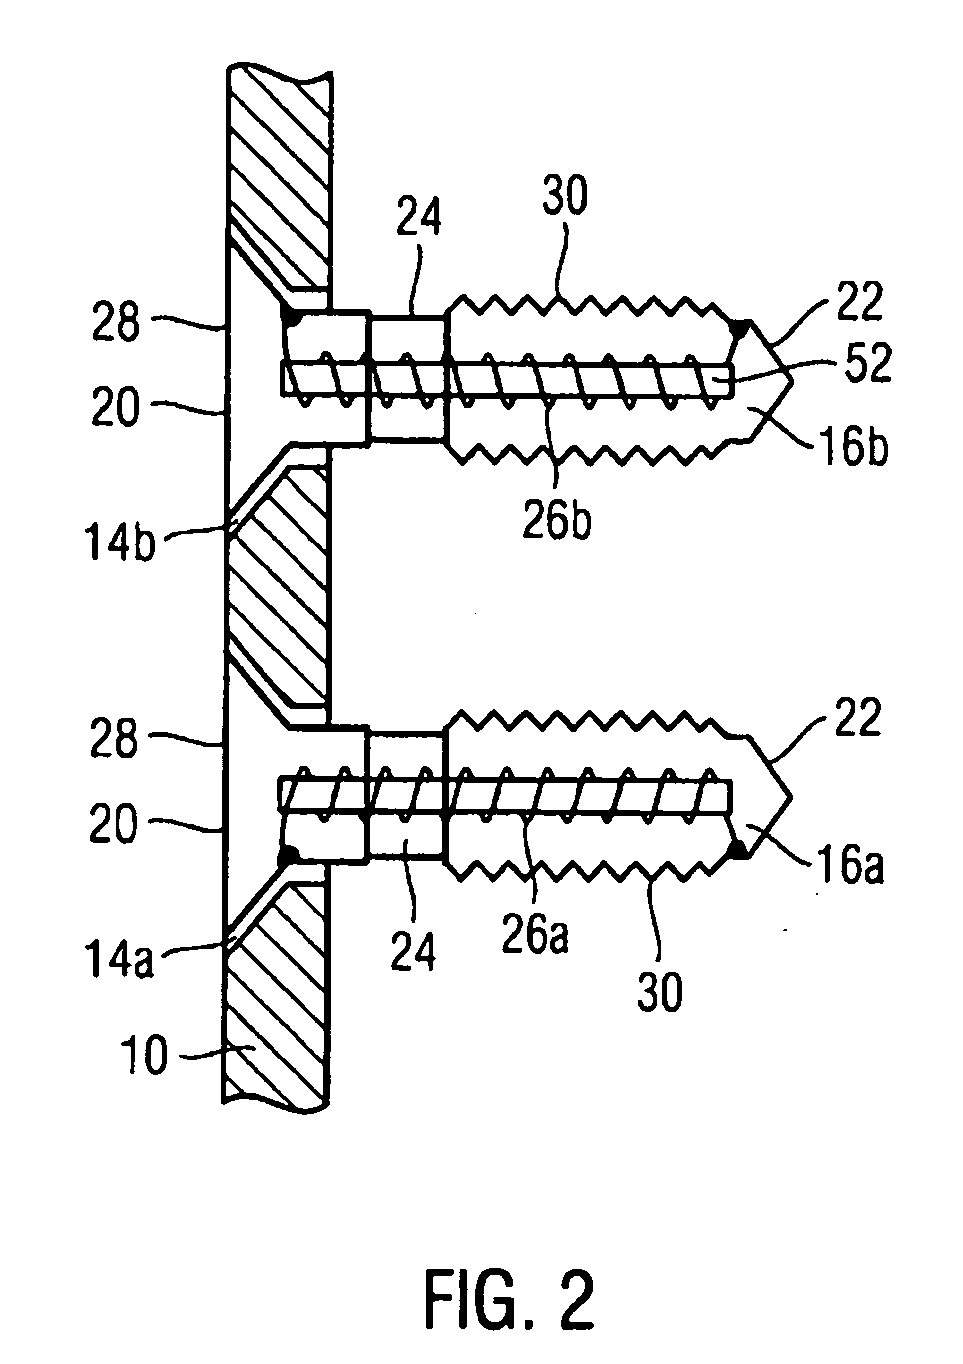 Implantable device, system for generating localised electromagnetic fields in the area of an implant and coil arrangement